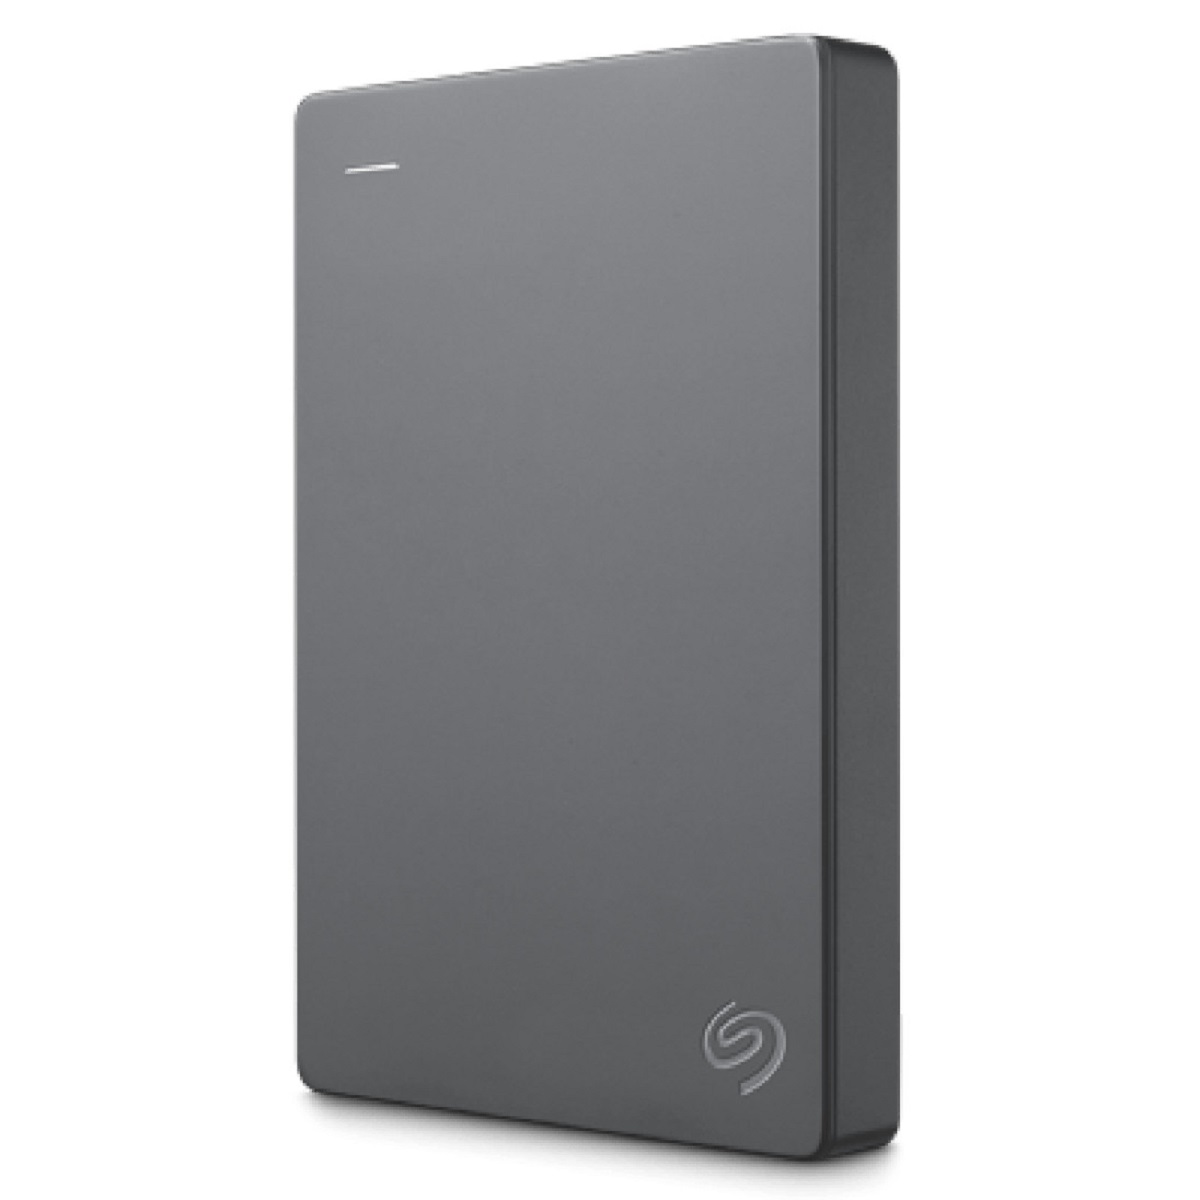 How To Use Seagate External Hard Drive Windows 10